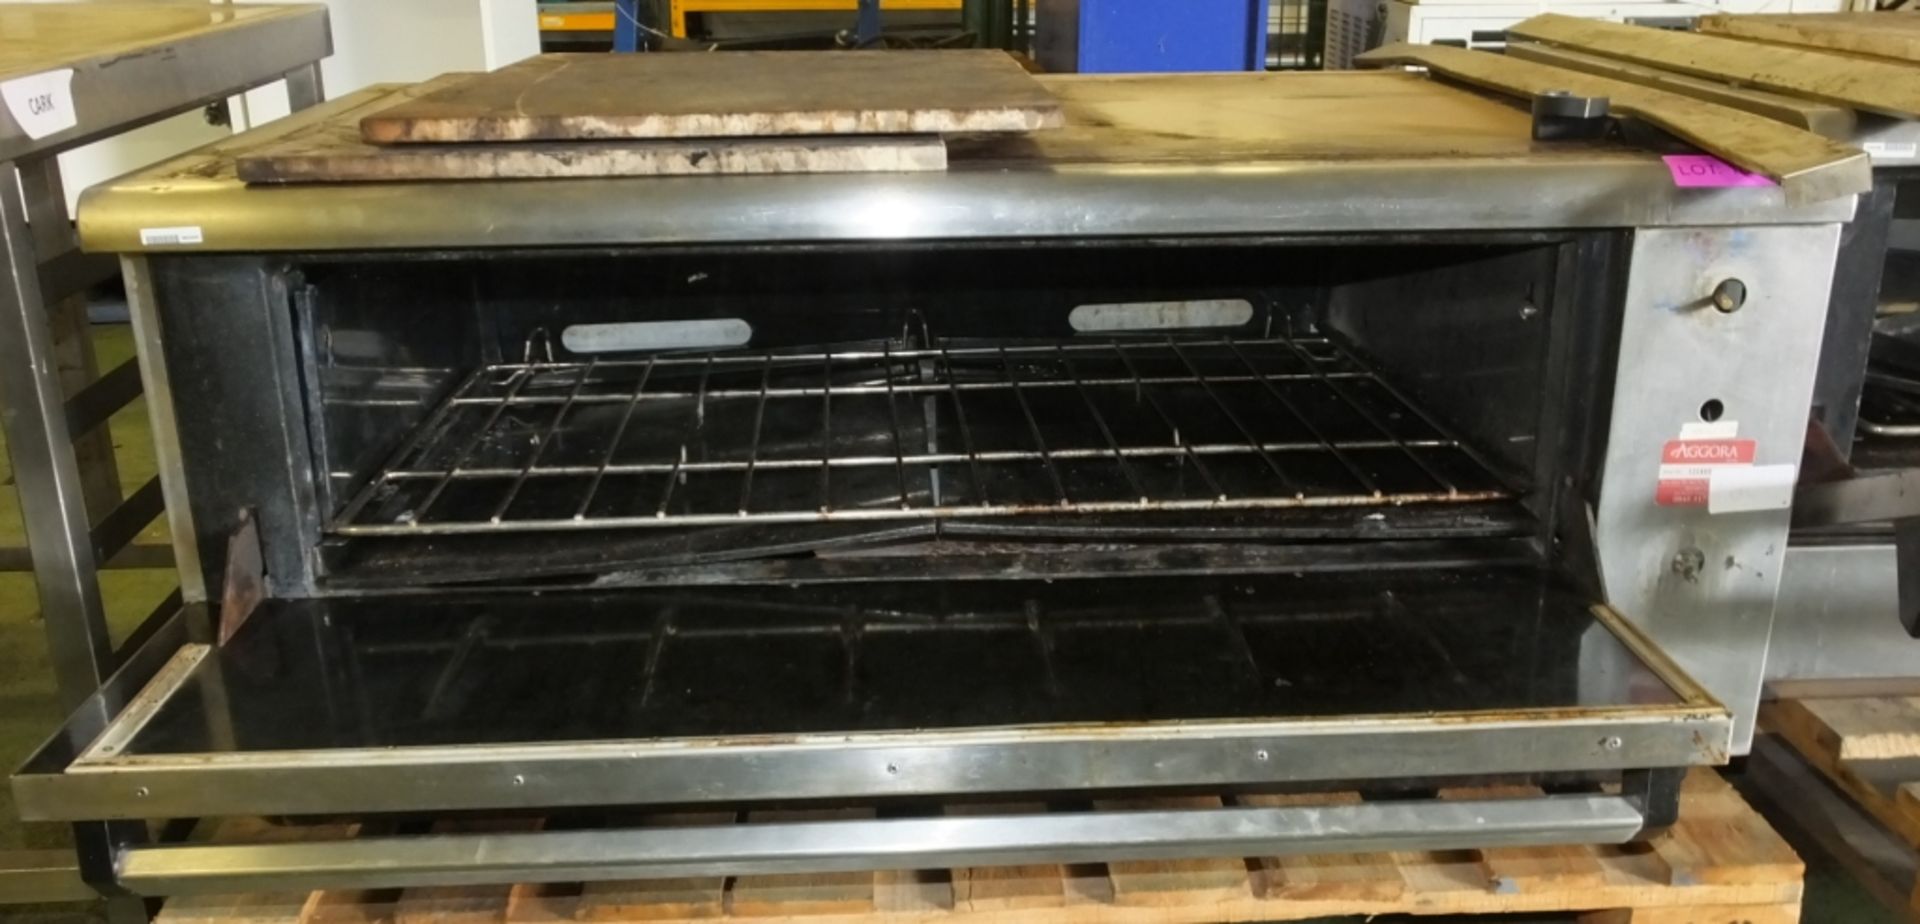 Falcon G2000 Pastry Oven W1200 x D800 x H510mm - Image 2 of 2